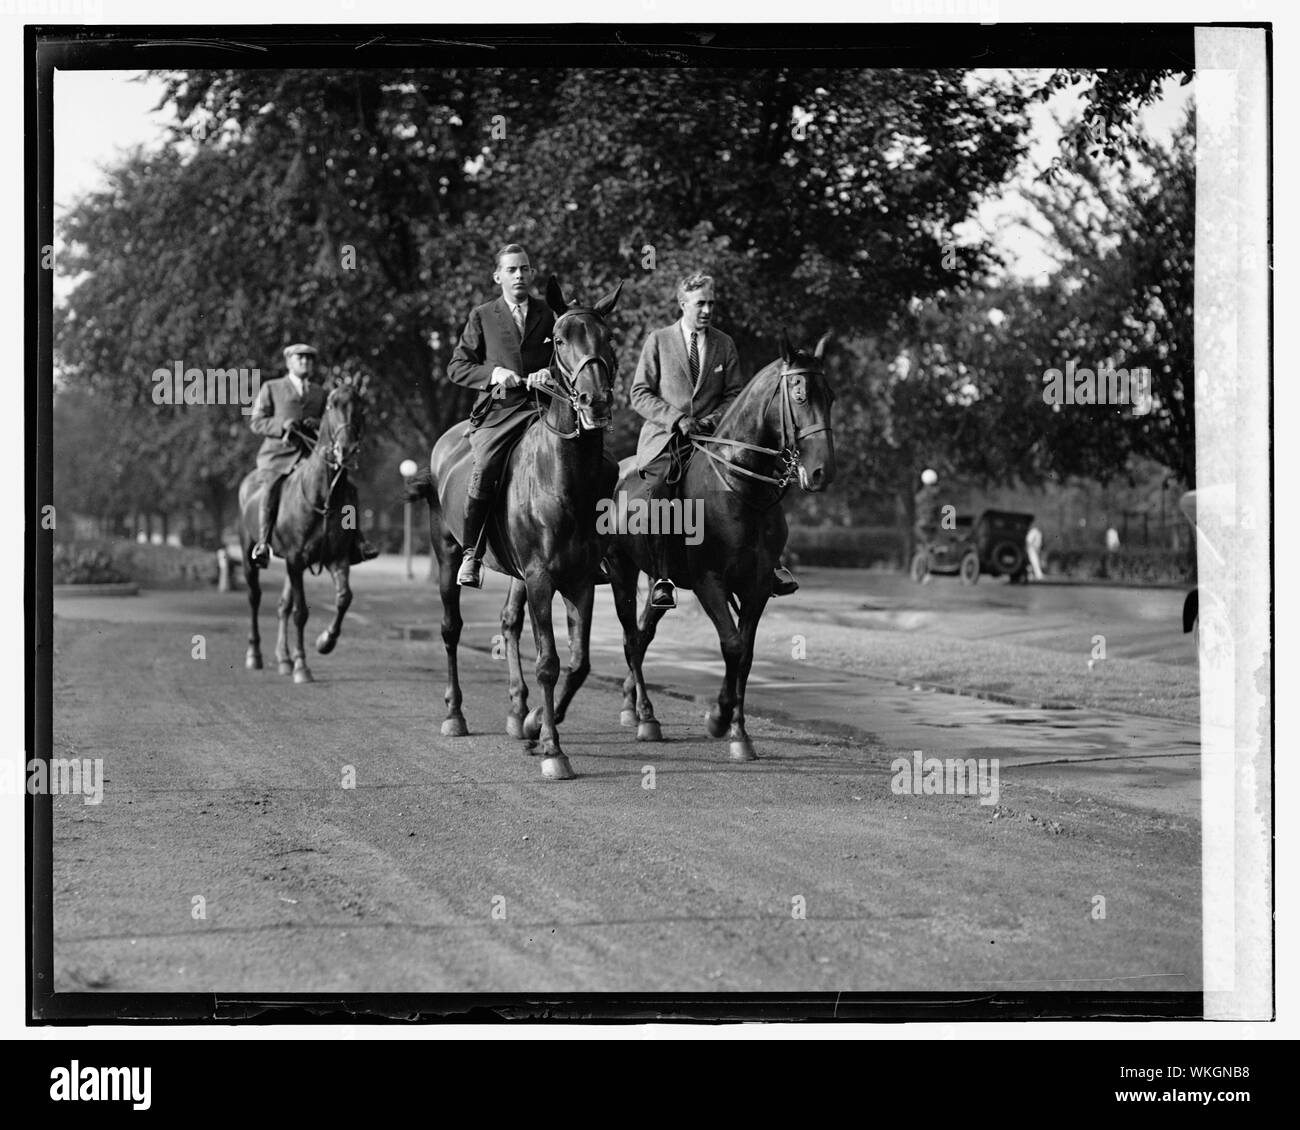 John haley Cut Out Stock Images & Pictures - Alamy